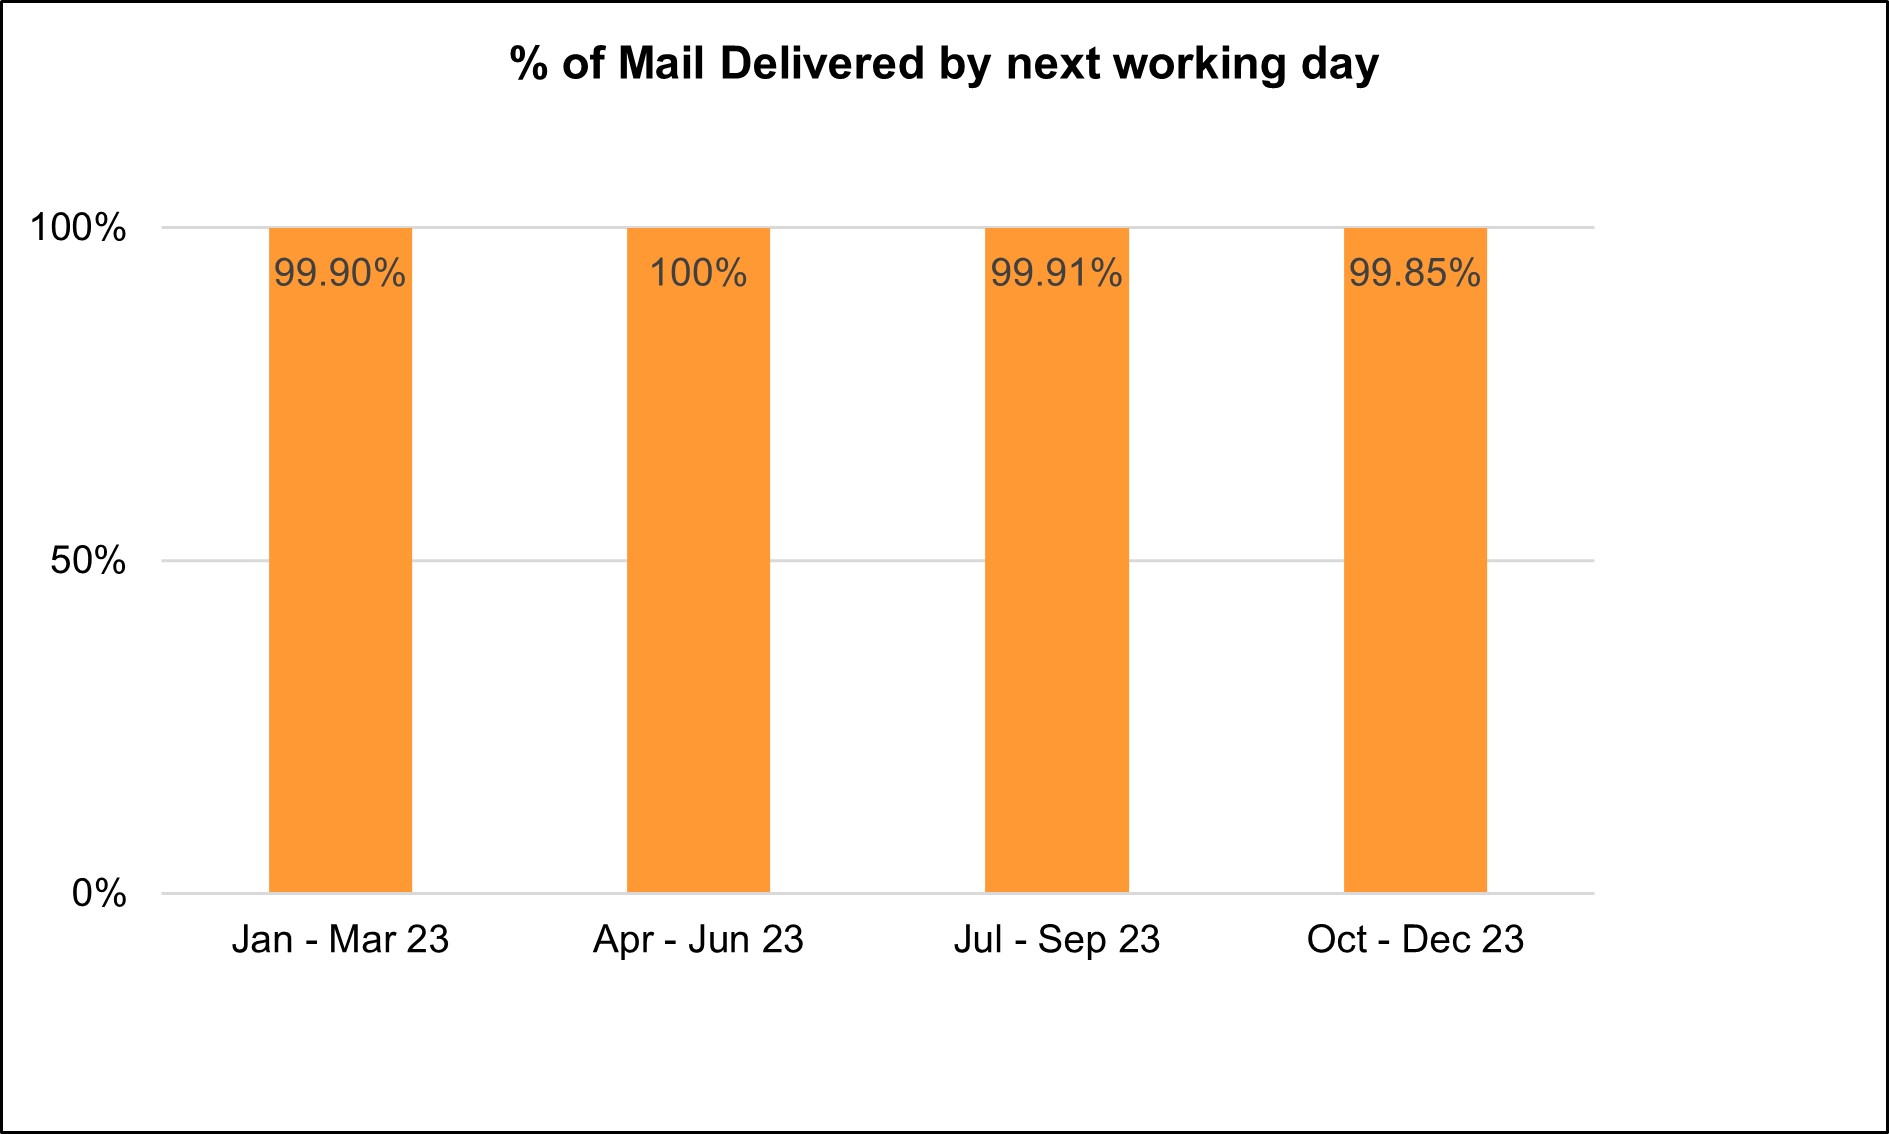 Percentage of mail delivered by next working day